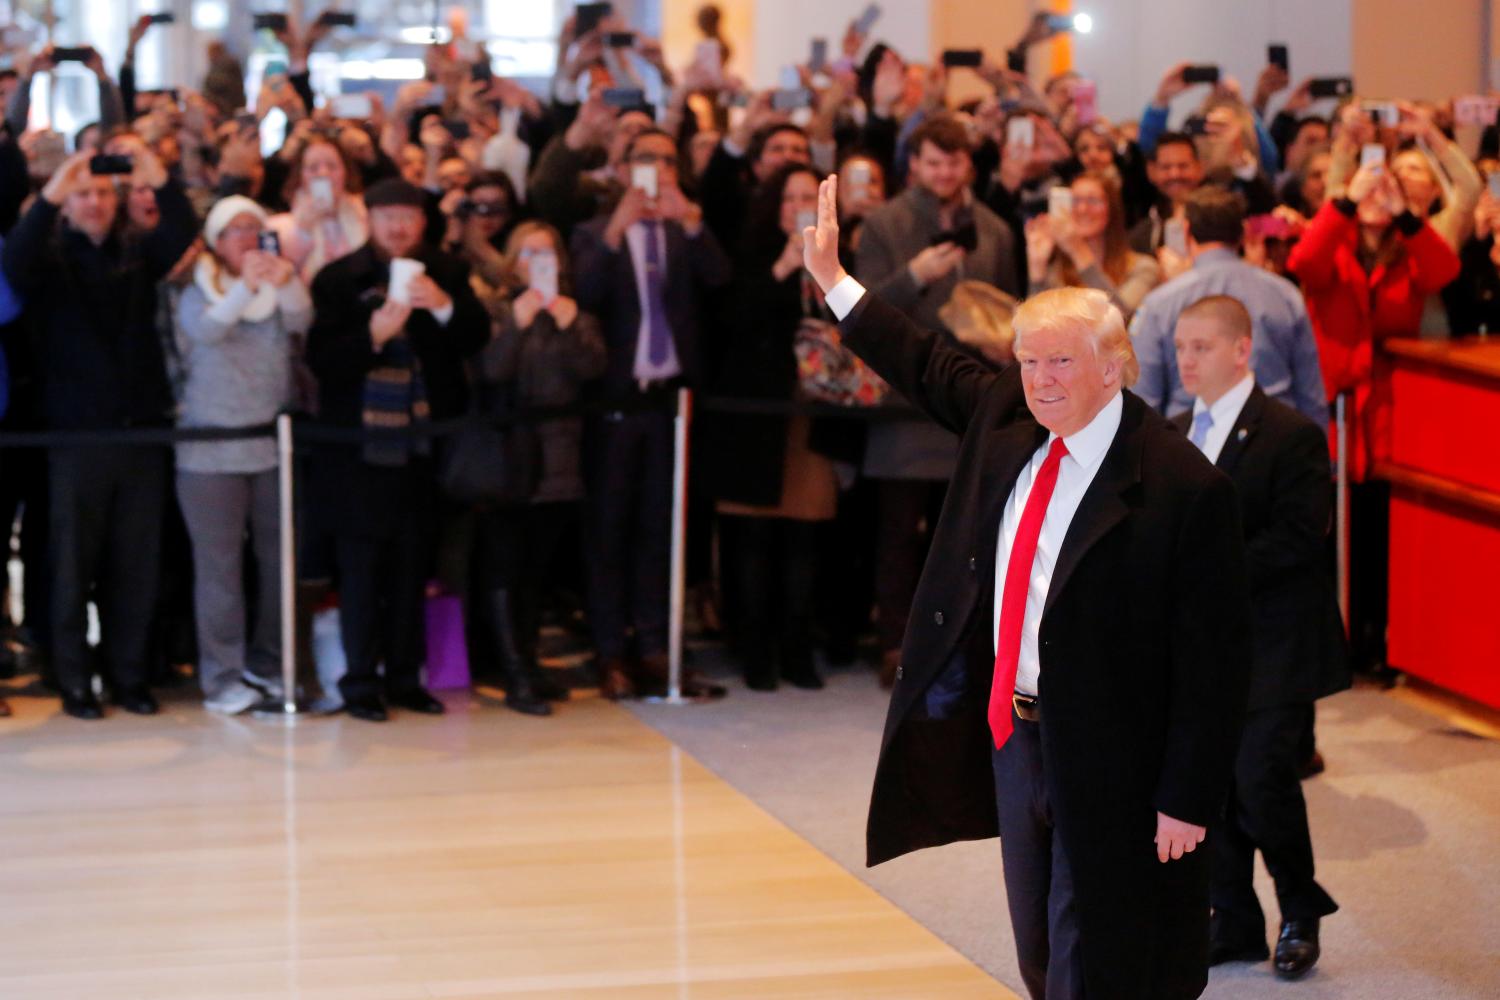 U.S. President elect Donald Trump reacts to a crowd gathered in the lobby of the New York Times building after a meeting in New York